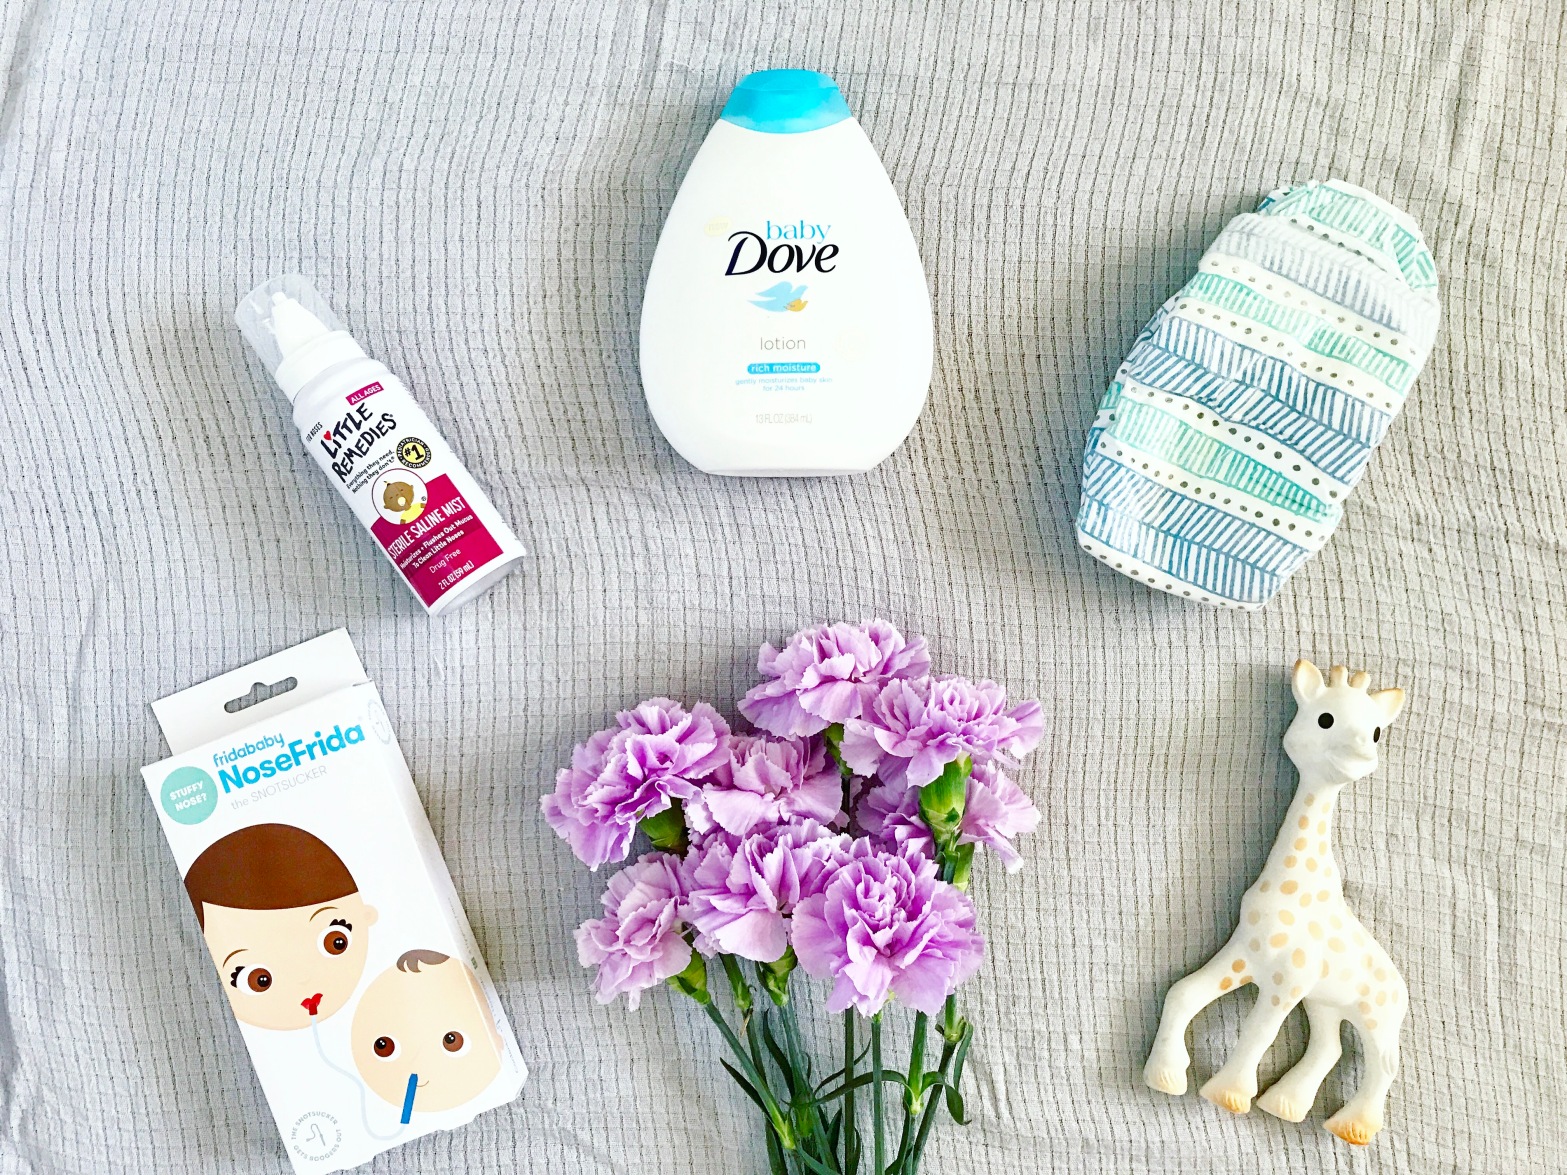 sophie the giraffe, dove, baby dove, lotion, honest company diapers, little remedies, nose frida, baby faves